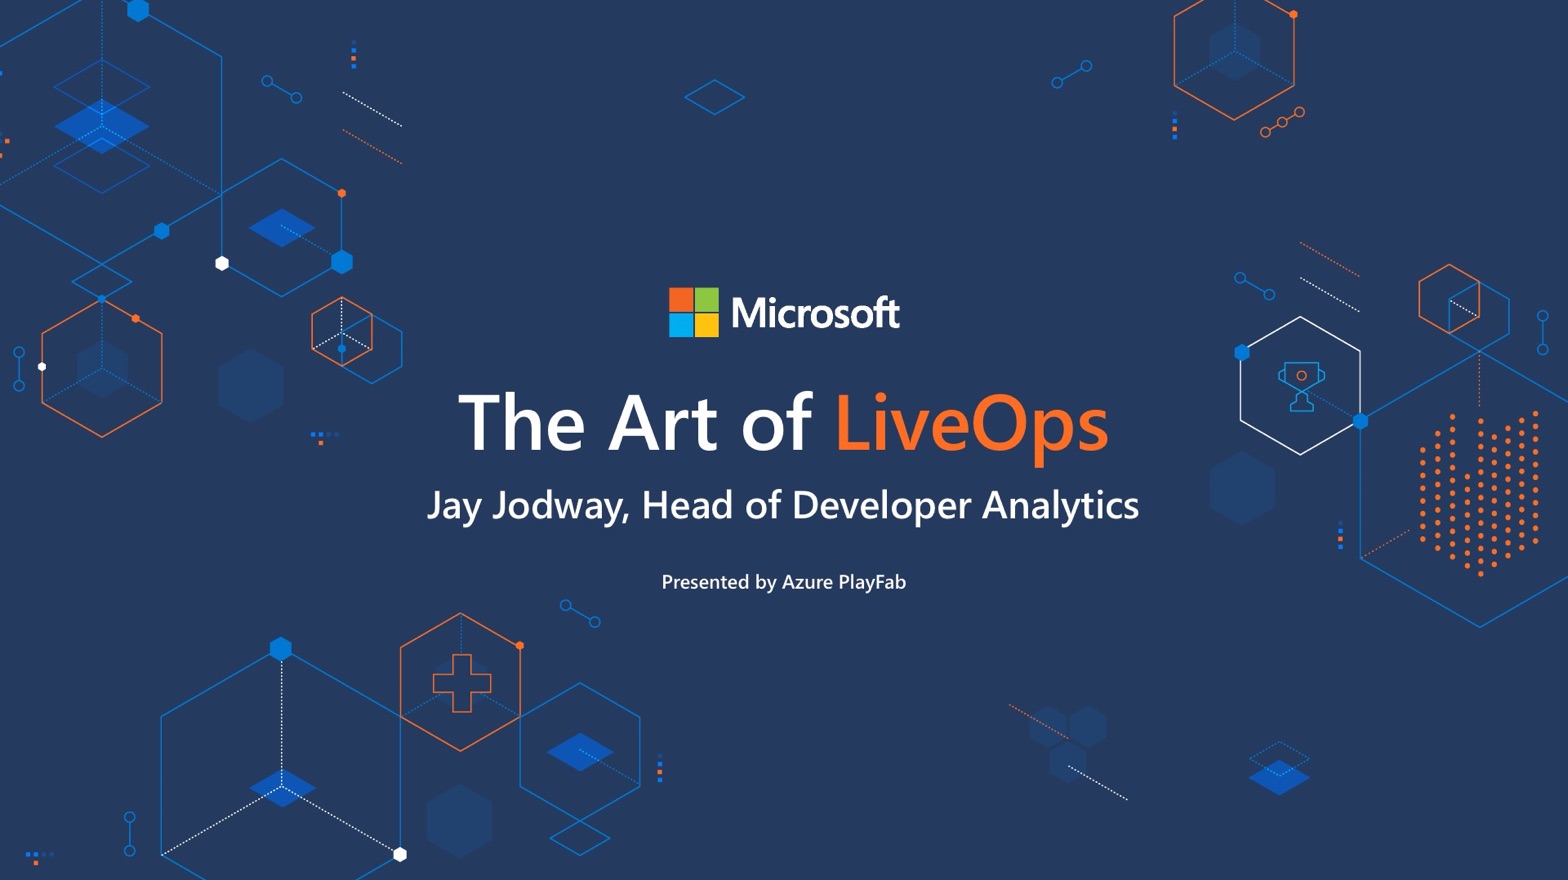 Hero image for The Art of LiveOps reheat post with Jay Jodway